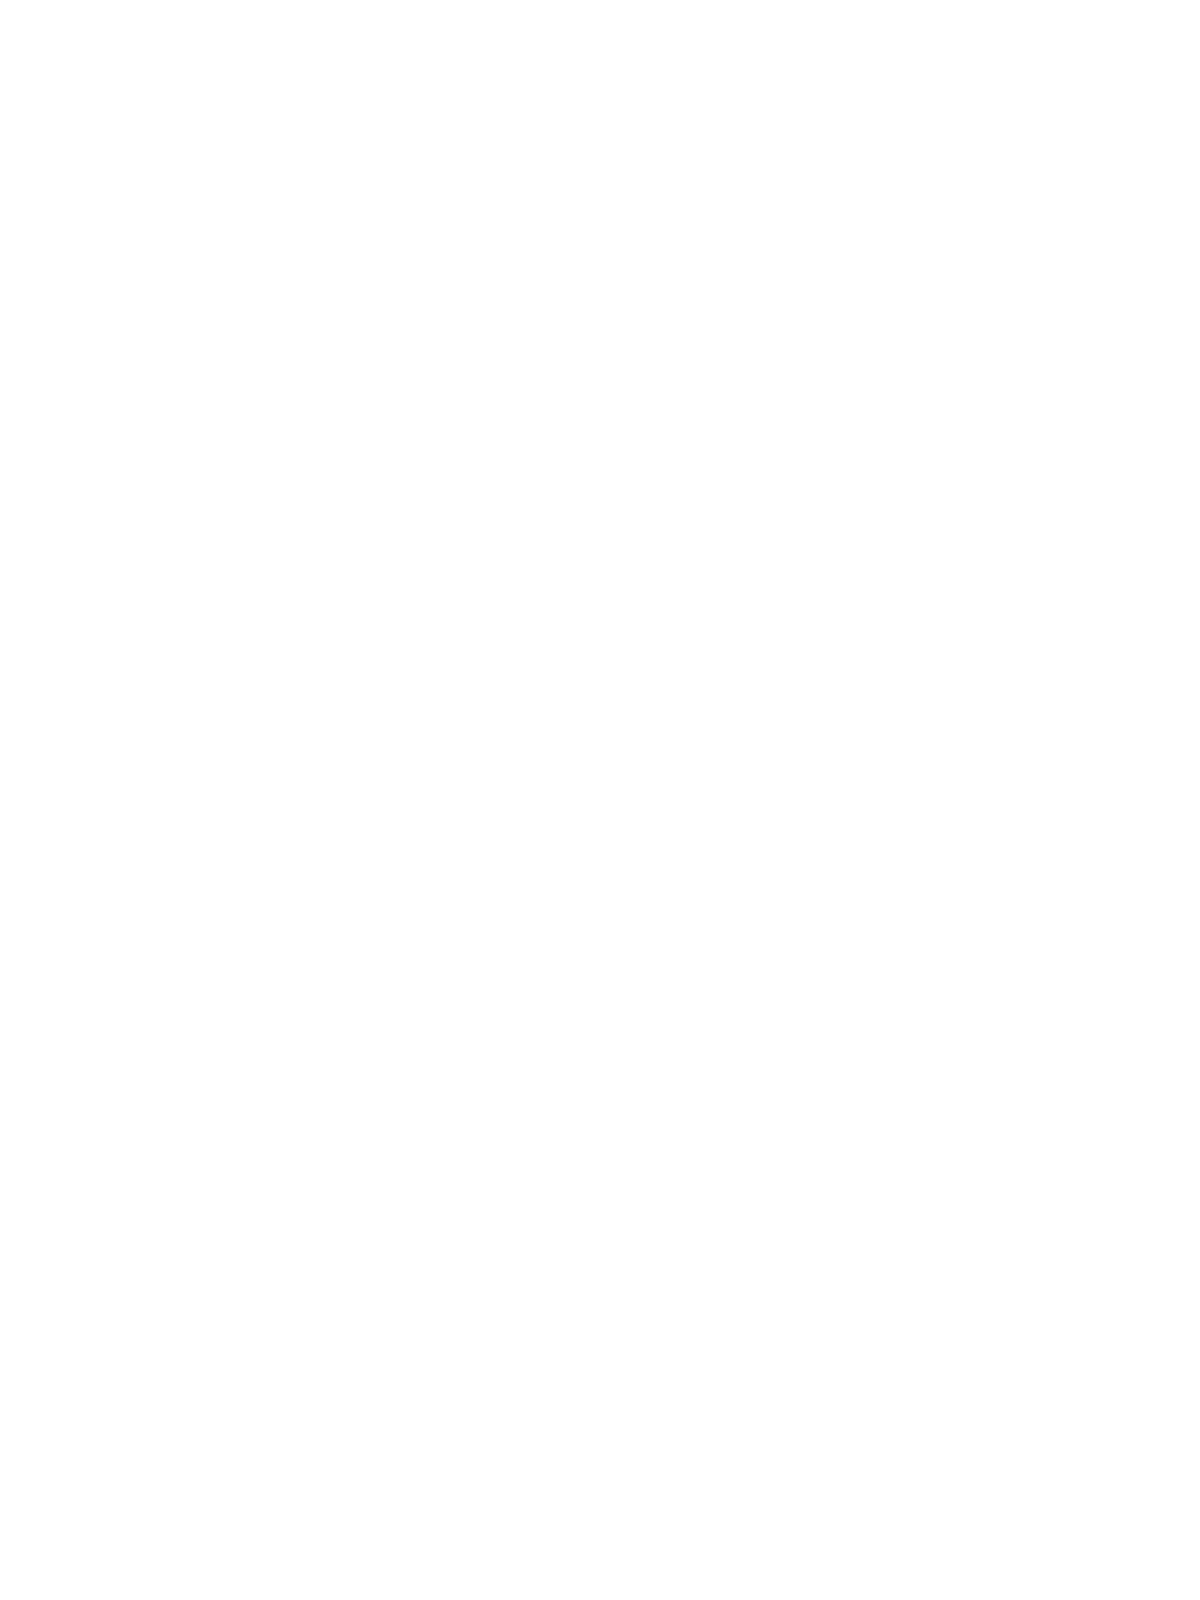 Students' Union structure